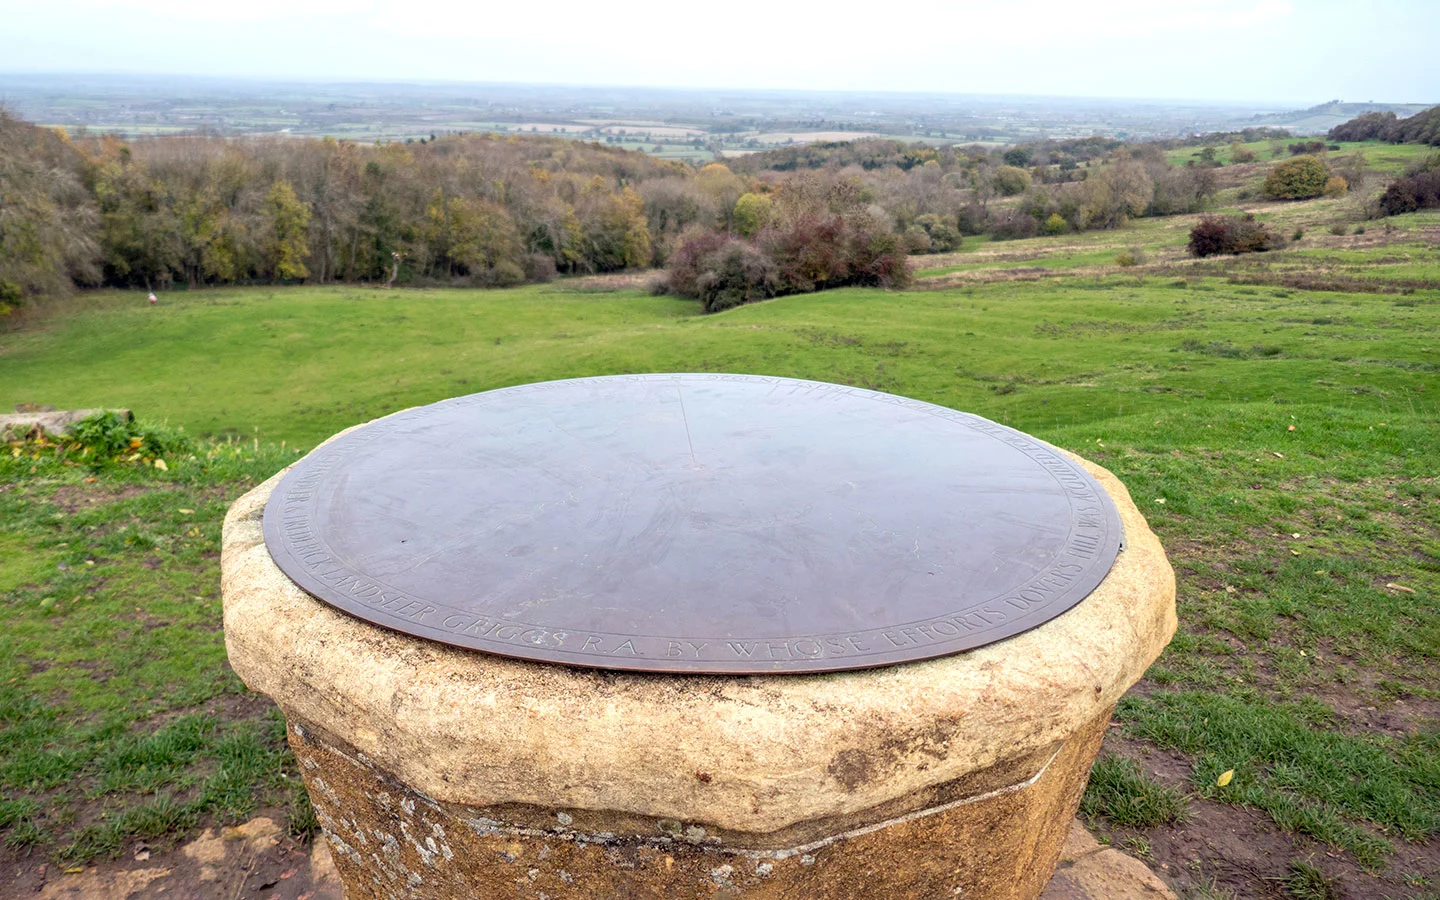 Views from the topograph on Dover's Hill near Chipping Campden